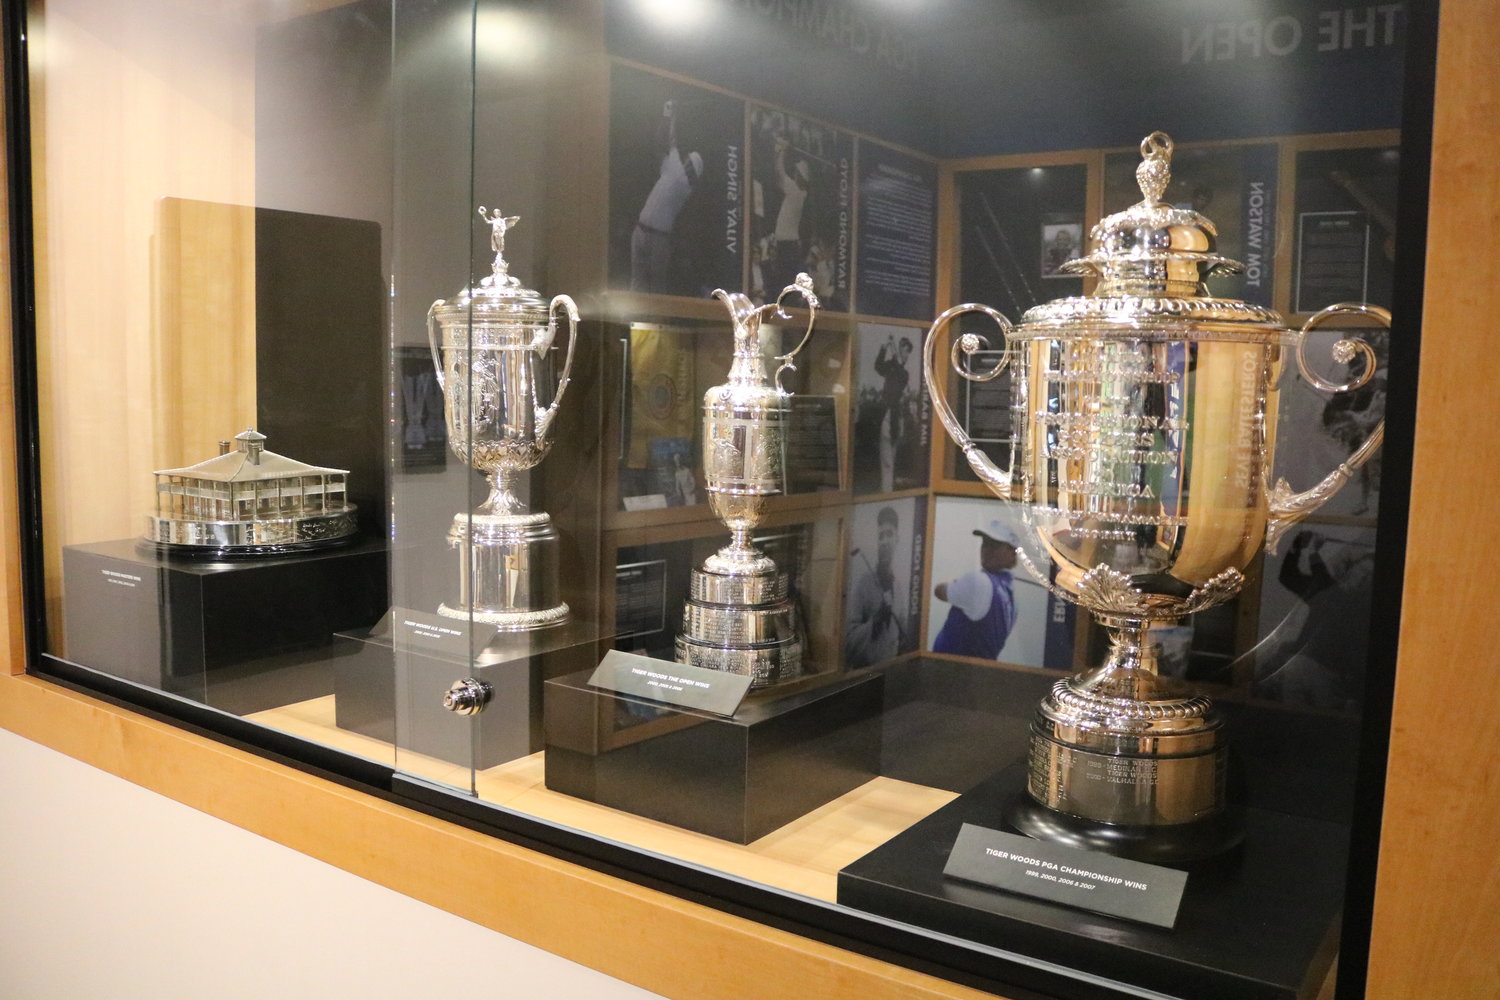 Tiger Woods has won 15 career majors, including the career grand slam. Trophies from his victories in the Masters, U.S. Open, British Open and PGA Championship are all on display.